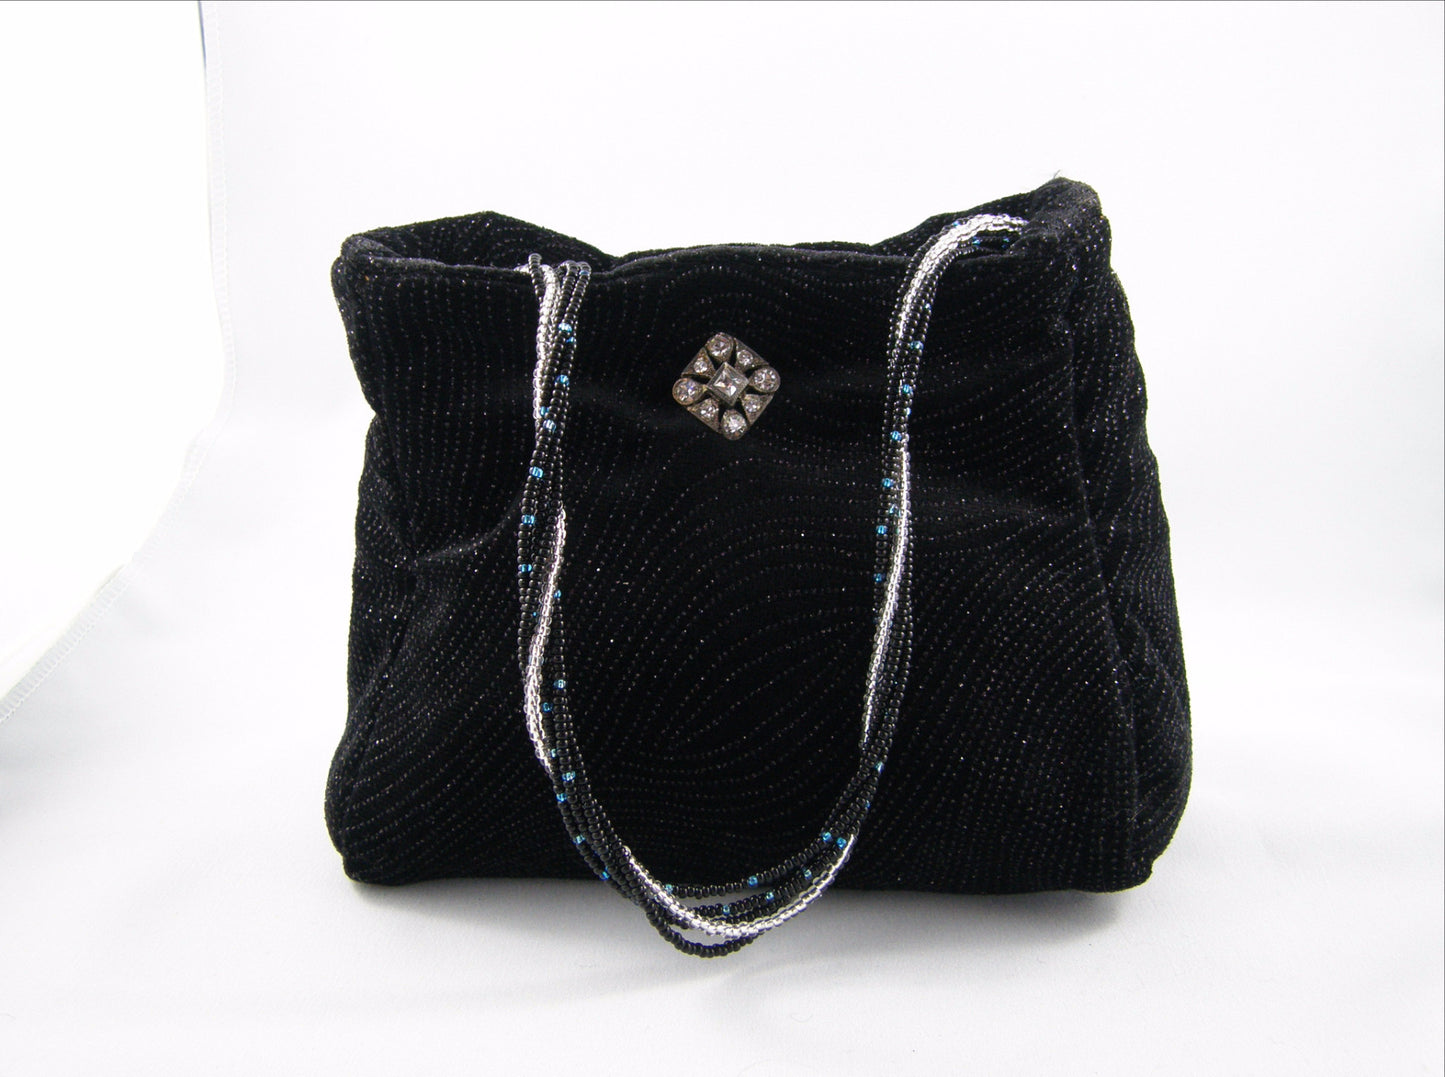 Black and Silver Evening Bag from Jenny Jag-Wear Design. The photo shows this compact clutch in black holiday fabric with silver glitter. The beaded handle is hand crafted from silver, black and turquoise seed beads, and embellished with a small crystal brooch. The Merle Collection from Jenny Jag-Wear Design